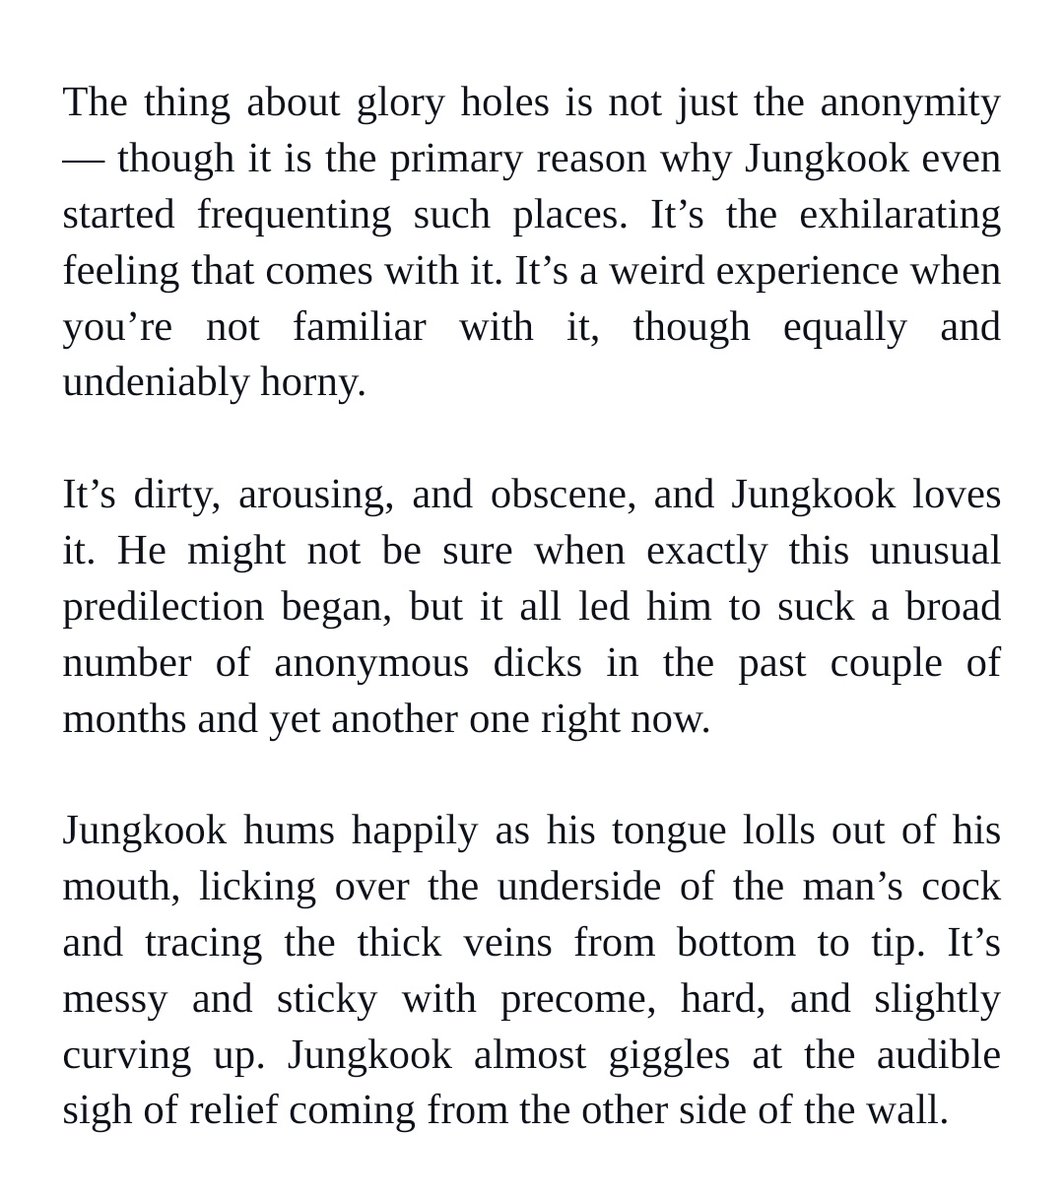 The thing about glory holes is not just the anonymity — though it is the primary reason why Jungkook even started frequenting such places. It’s the exhilarating feeling that comes with it. It’s a weird experience when you’re not familiar with it, though equally and undeniably horny. 


It’s dirty, arousing, and obscene, and Jungkook loves it. He might not be sure when exactly this unusual predilection began, but it all led him to suck a broad number of anonymous dicks in the past couple of months and yet another one right now. 


Jungkook hums happily as his tongue lolls out of his mouth, licking over the underside of the man’s cock and tracing the thick veins from bottom to tip. It’s messy and sticky with precome, hard, and slightly curving up. Jungkook almost giggles at the audible sigh of relief coming from the other side of the wall.